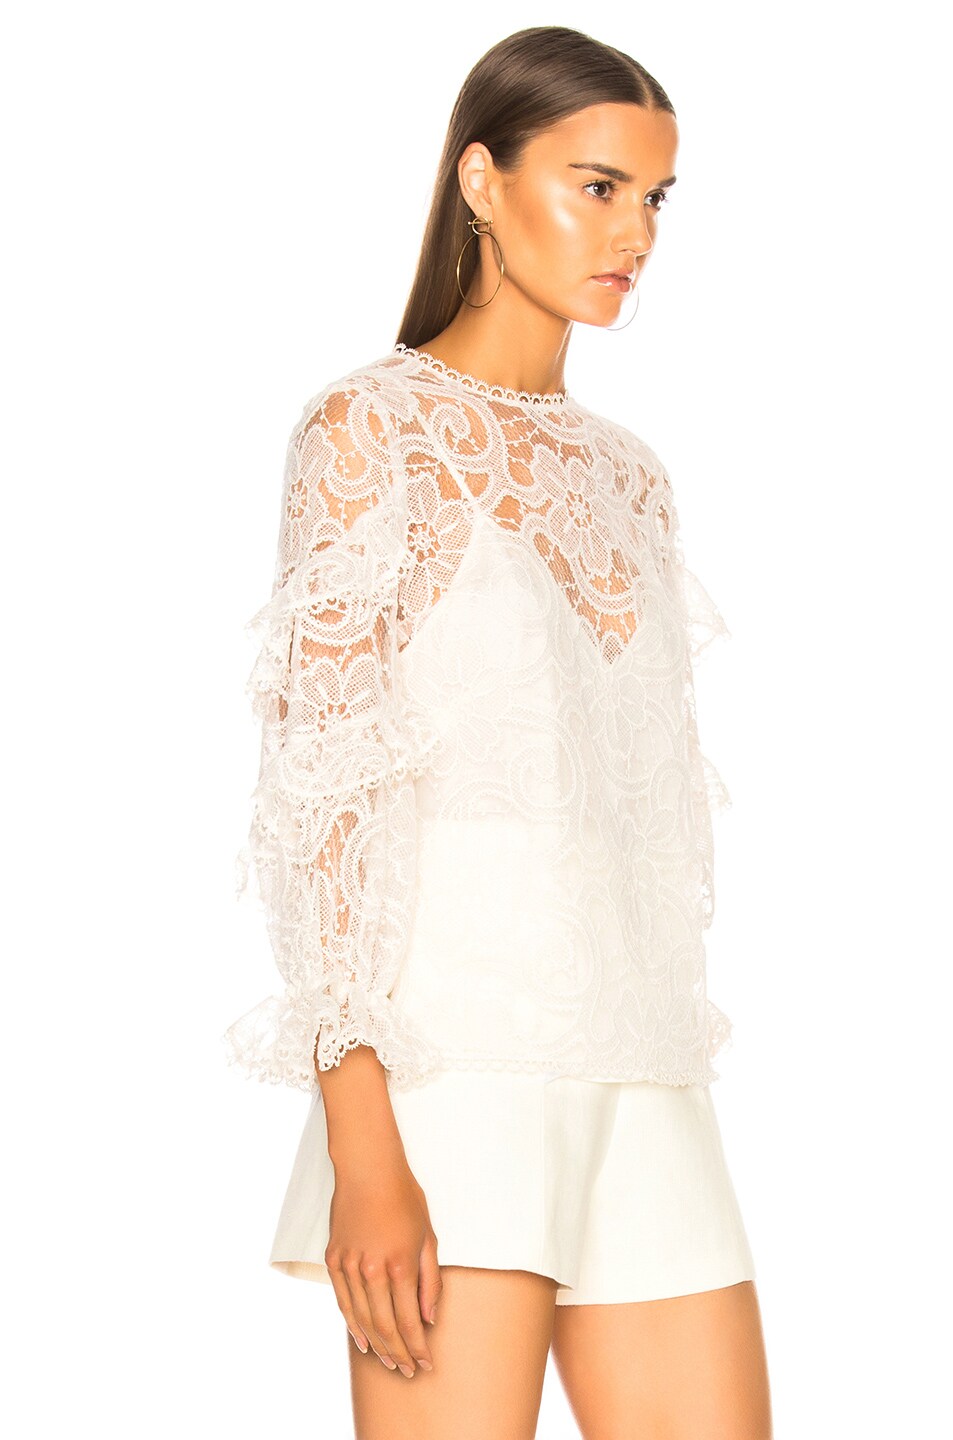 Alexis Ariell Top in Venice Lace | FWRD